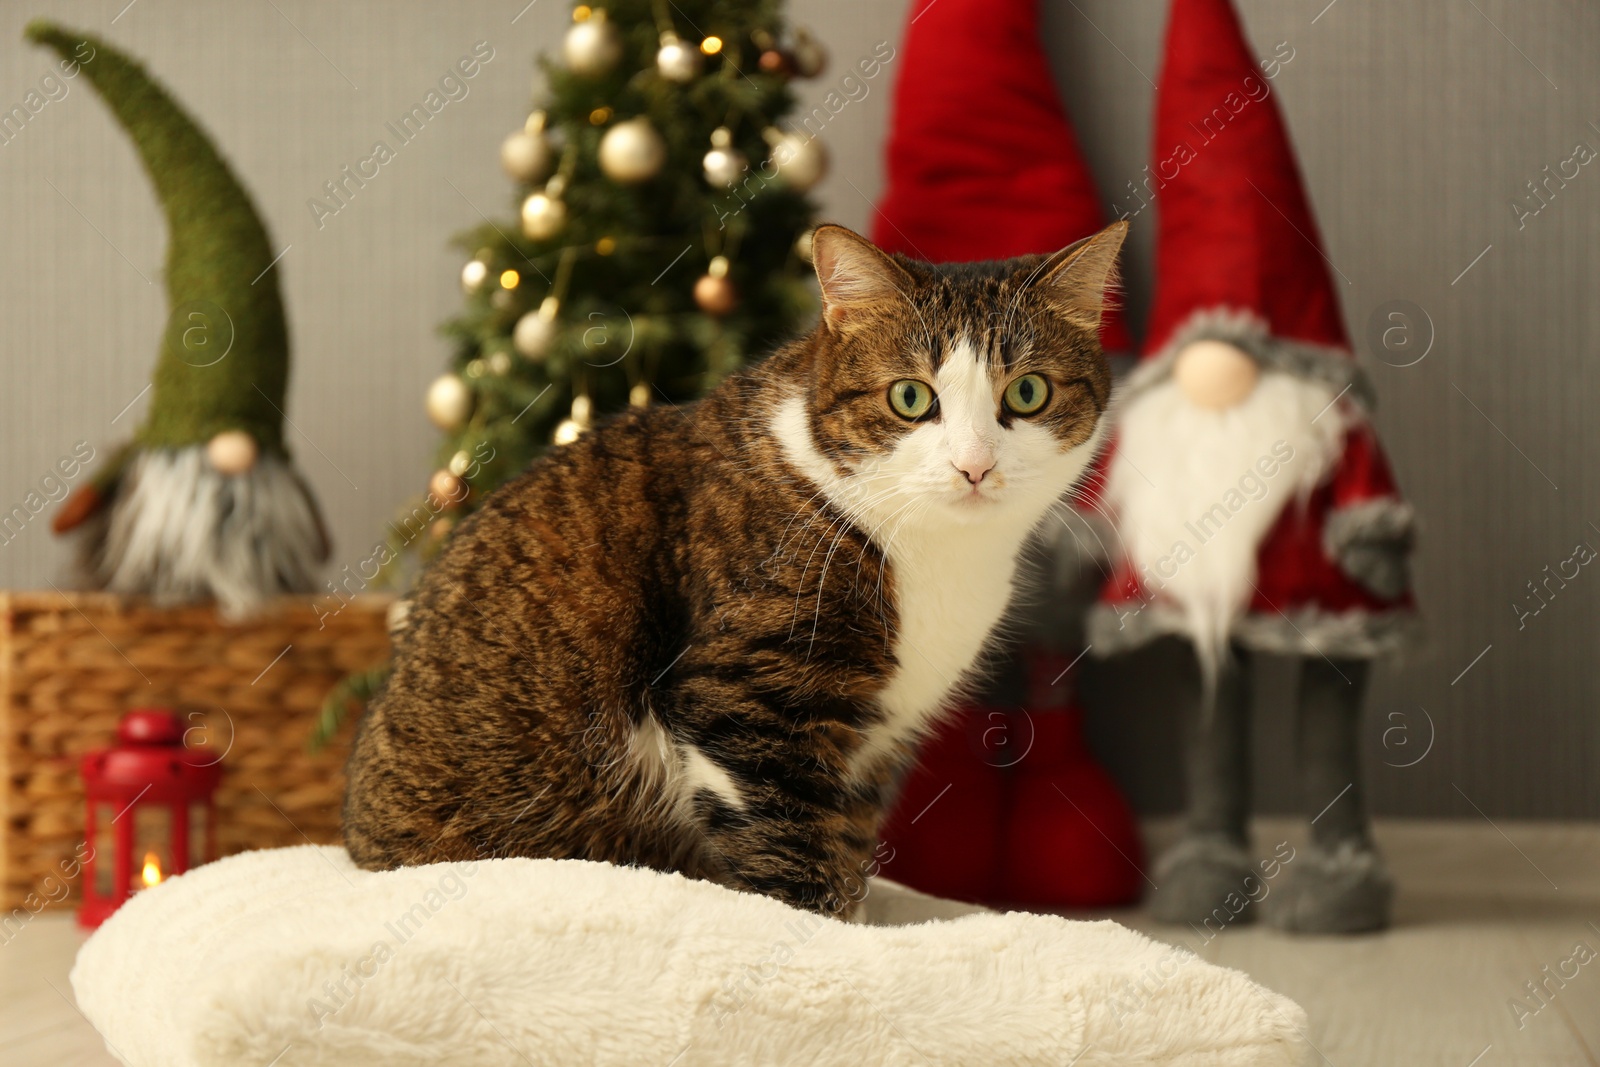 Photo of Cute cat sitting on soft pillow near Christmas decor at home. Adorable pet